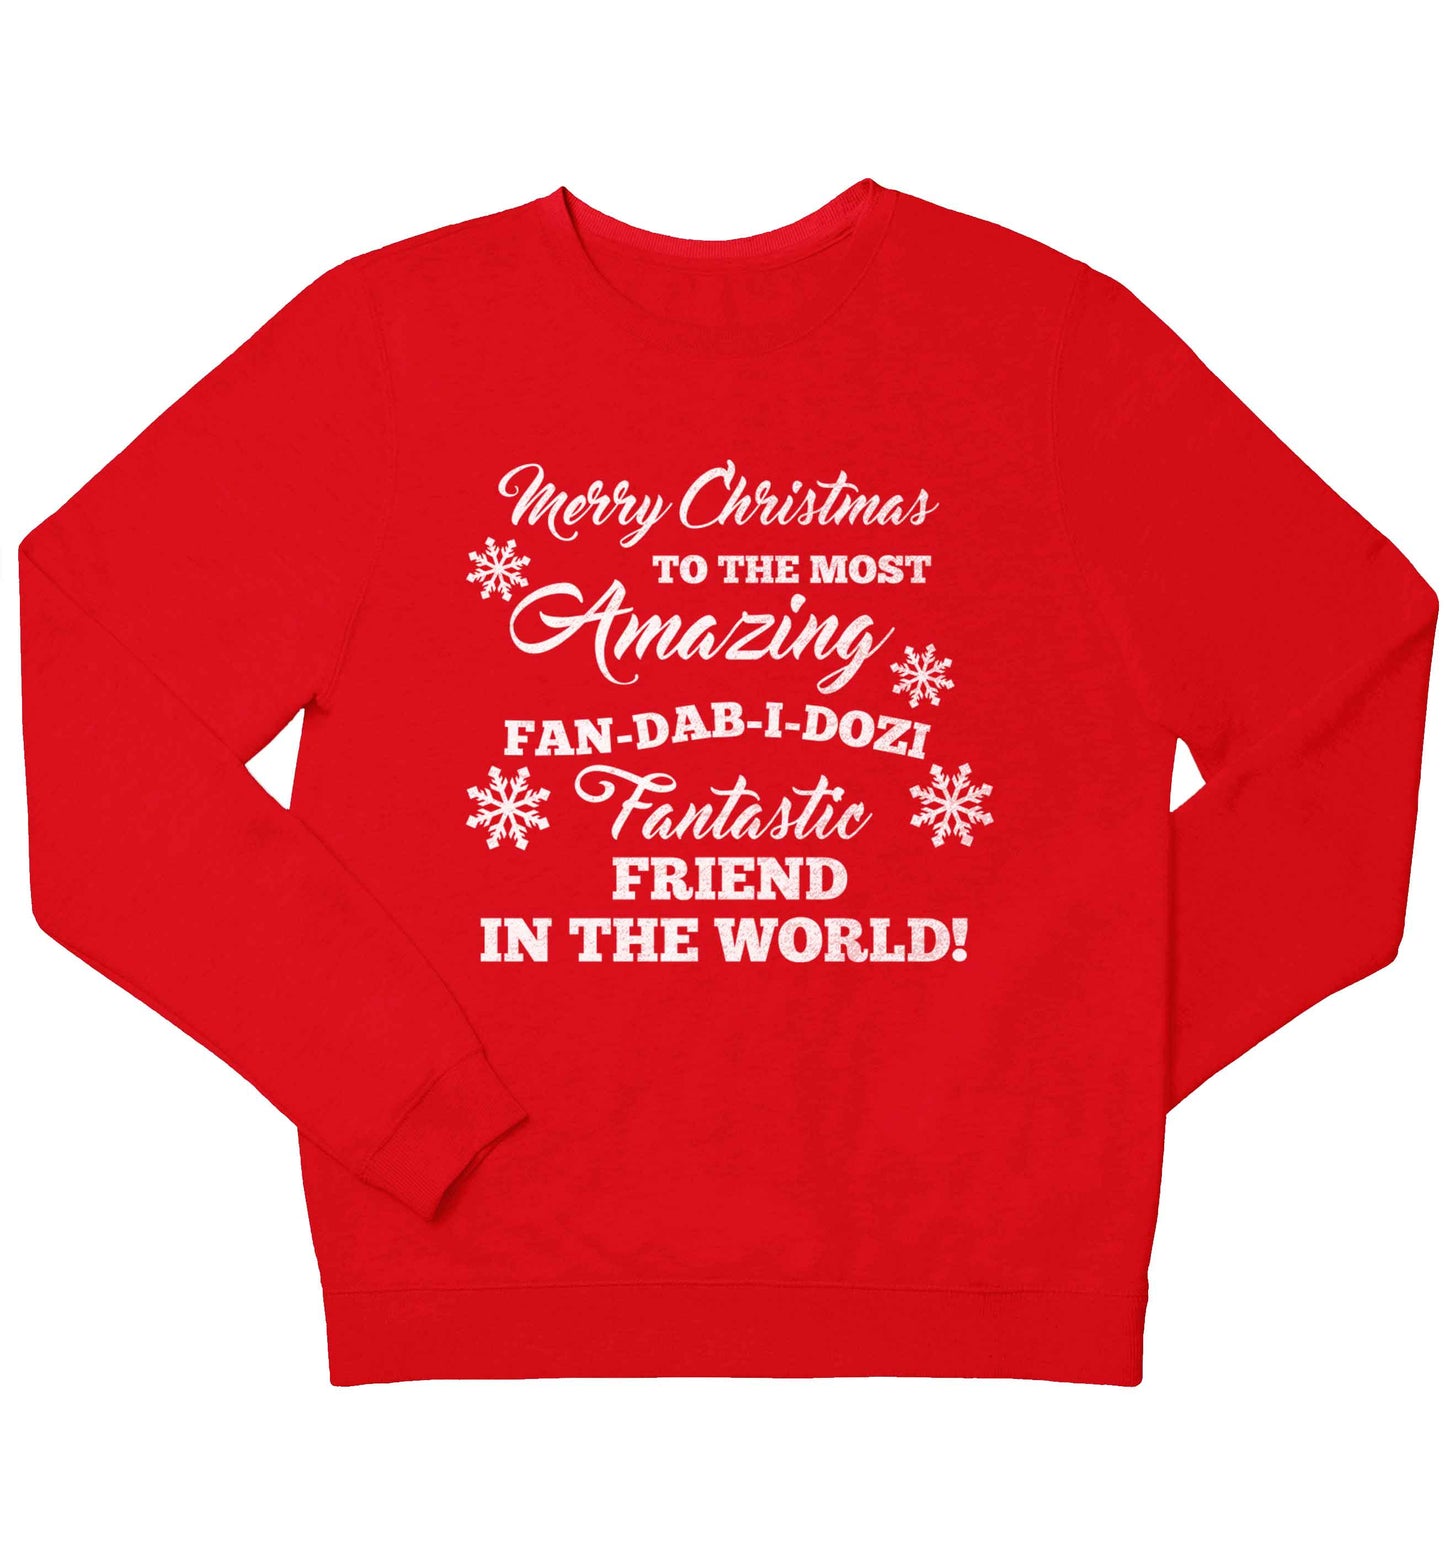 Merry Christmas to the most amazing fan-dab-i-dozi fantasic friend in the world children's grey sweater 12-13 Years